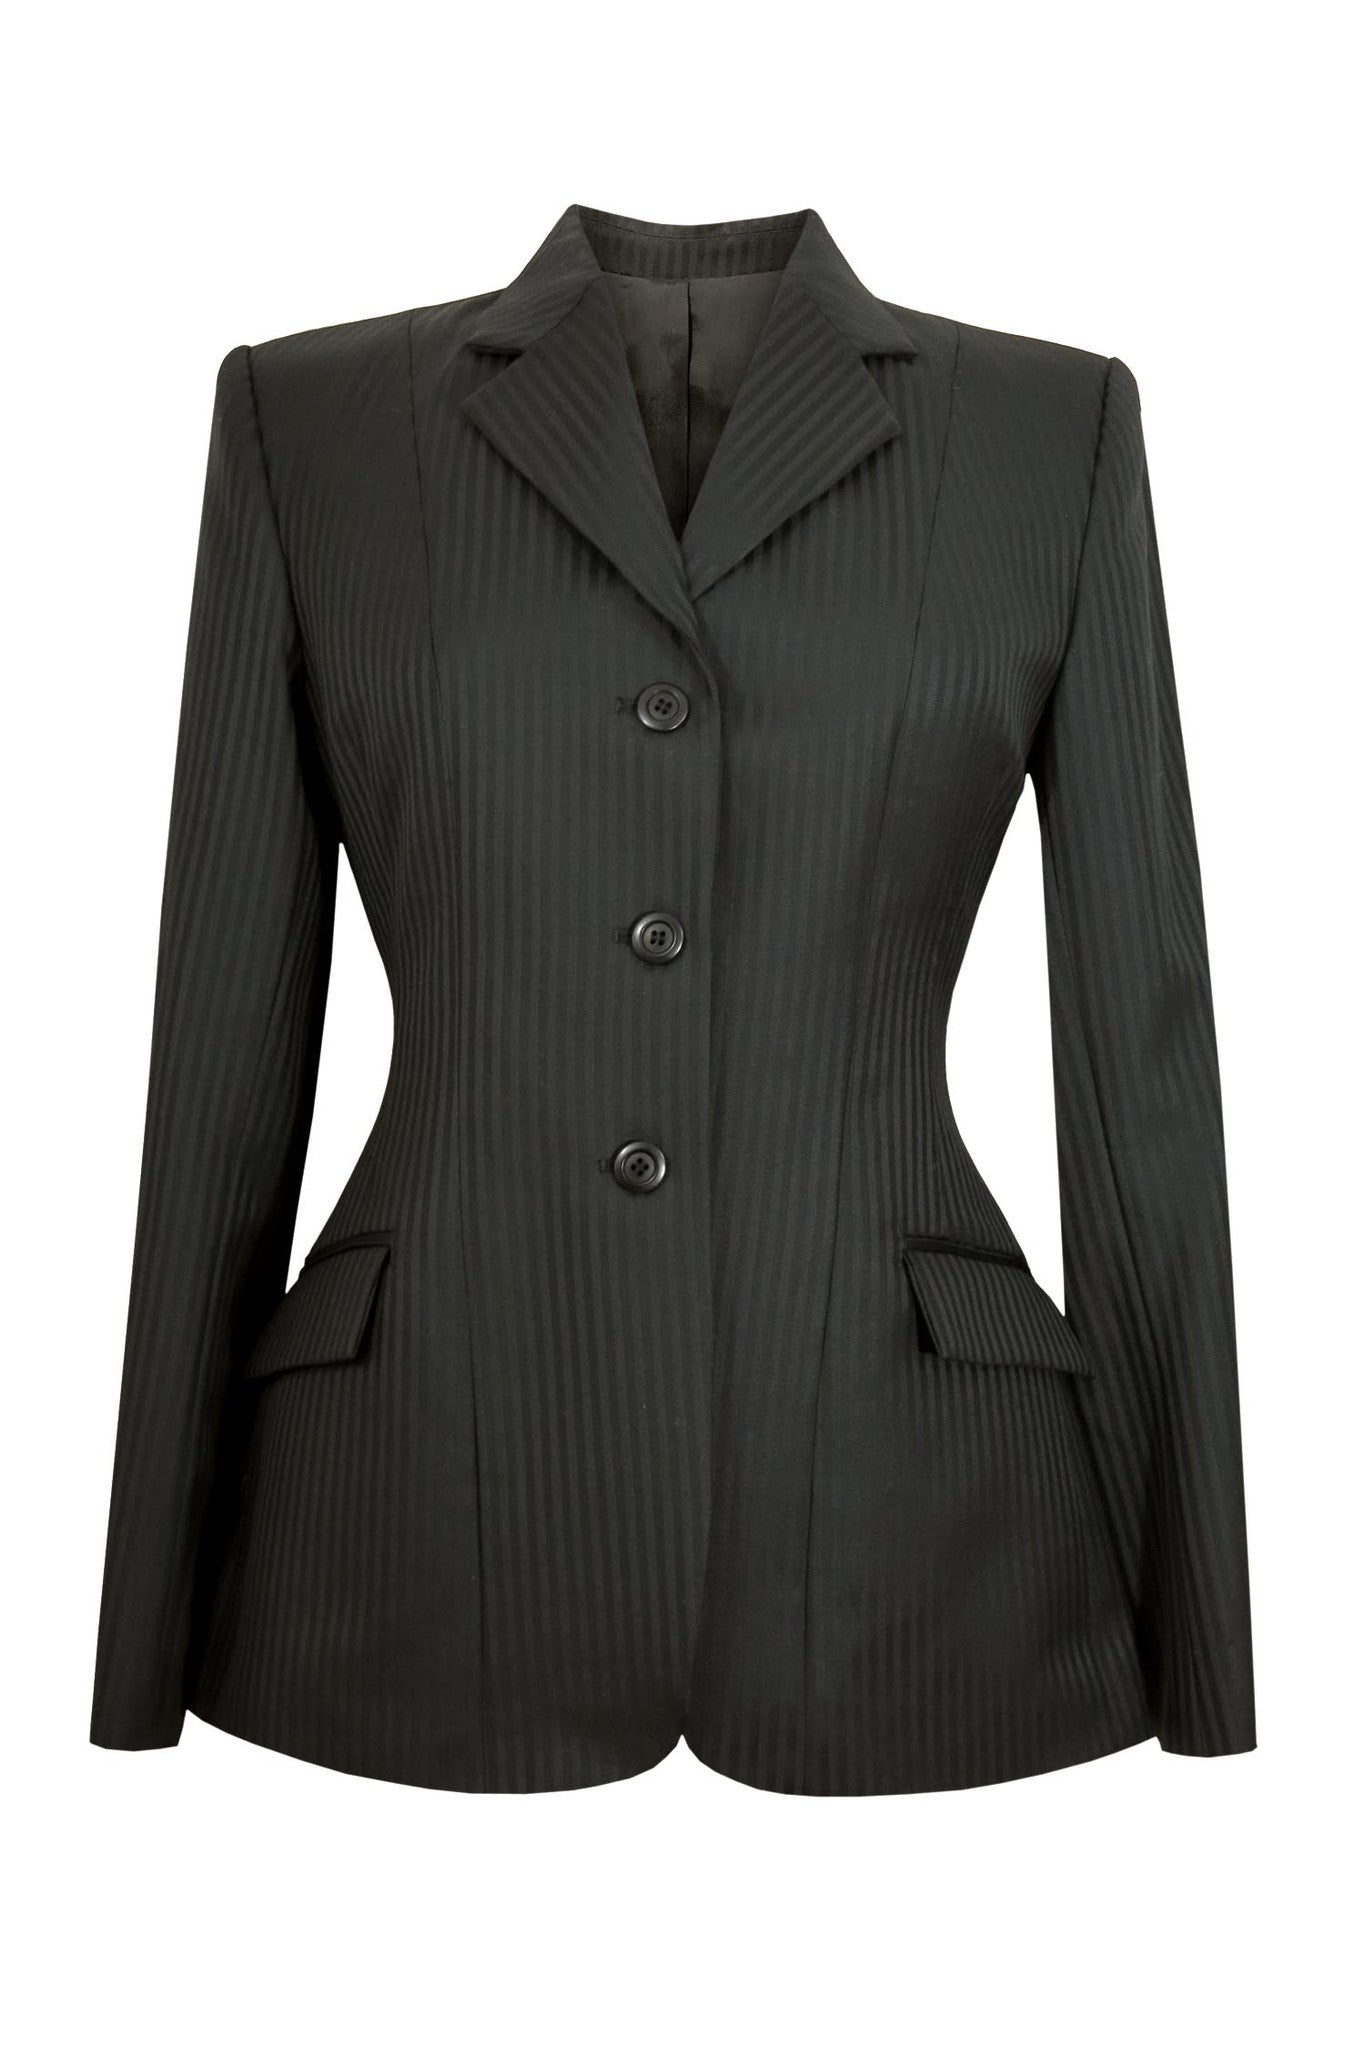 Black wool jacket with thick stripes. 